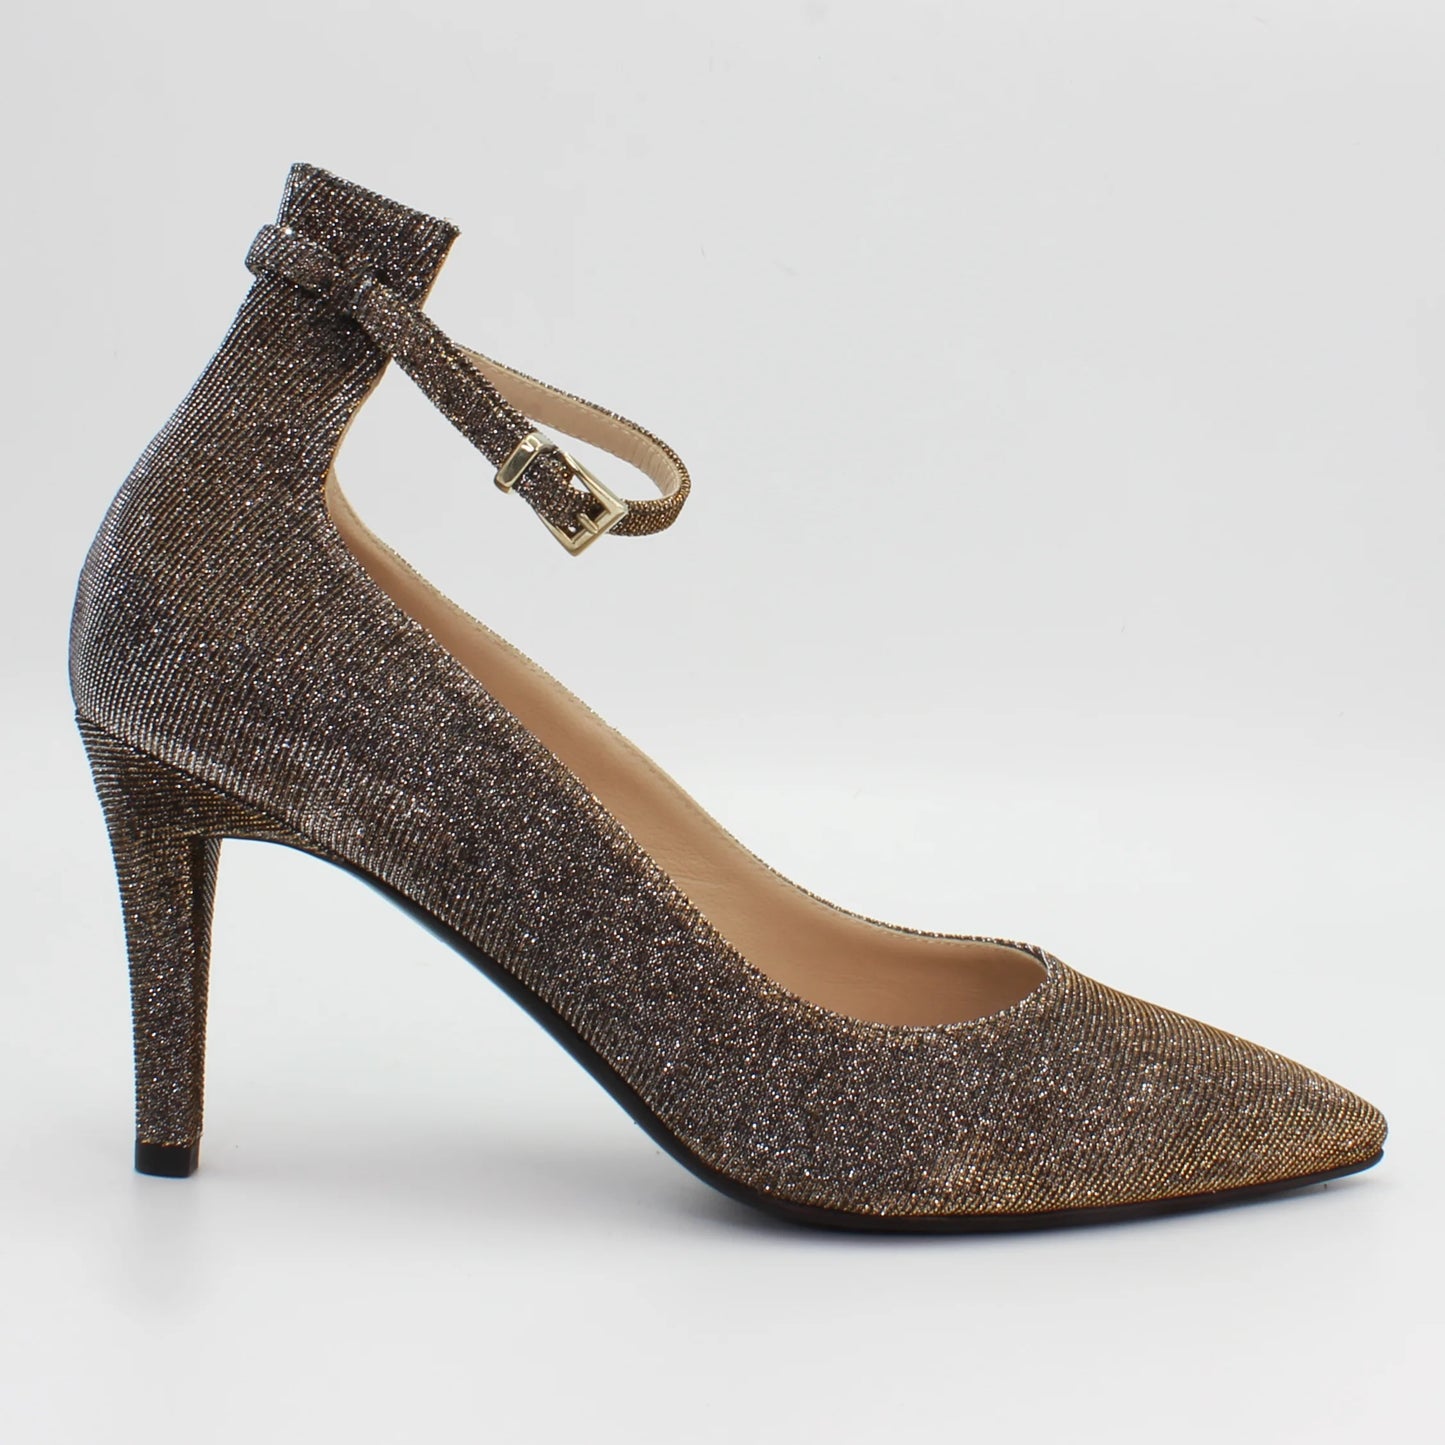 Ladies Glittering Court Shoe. Genuine calf leather and fabric upper and leather sole. made in Italy.